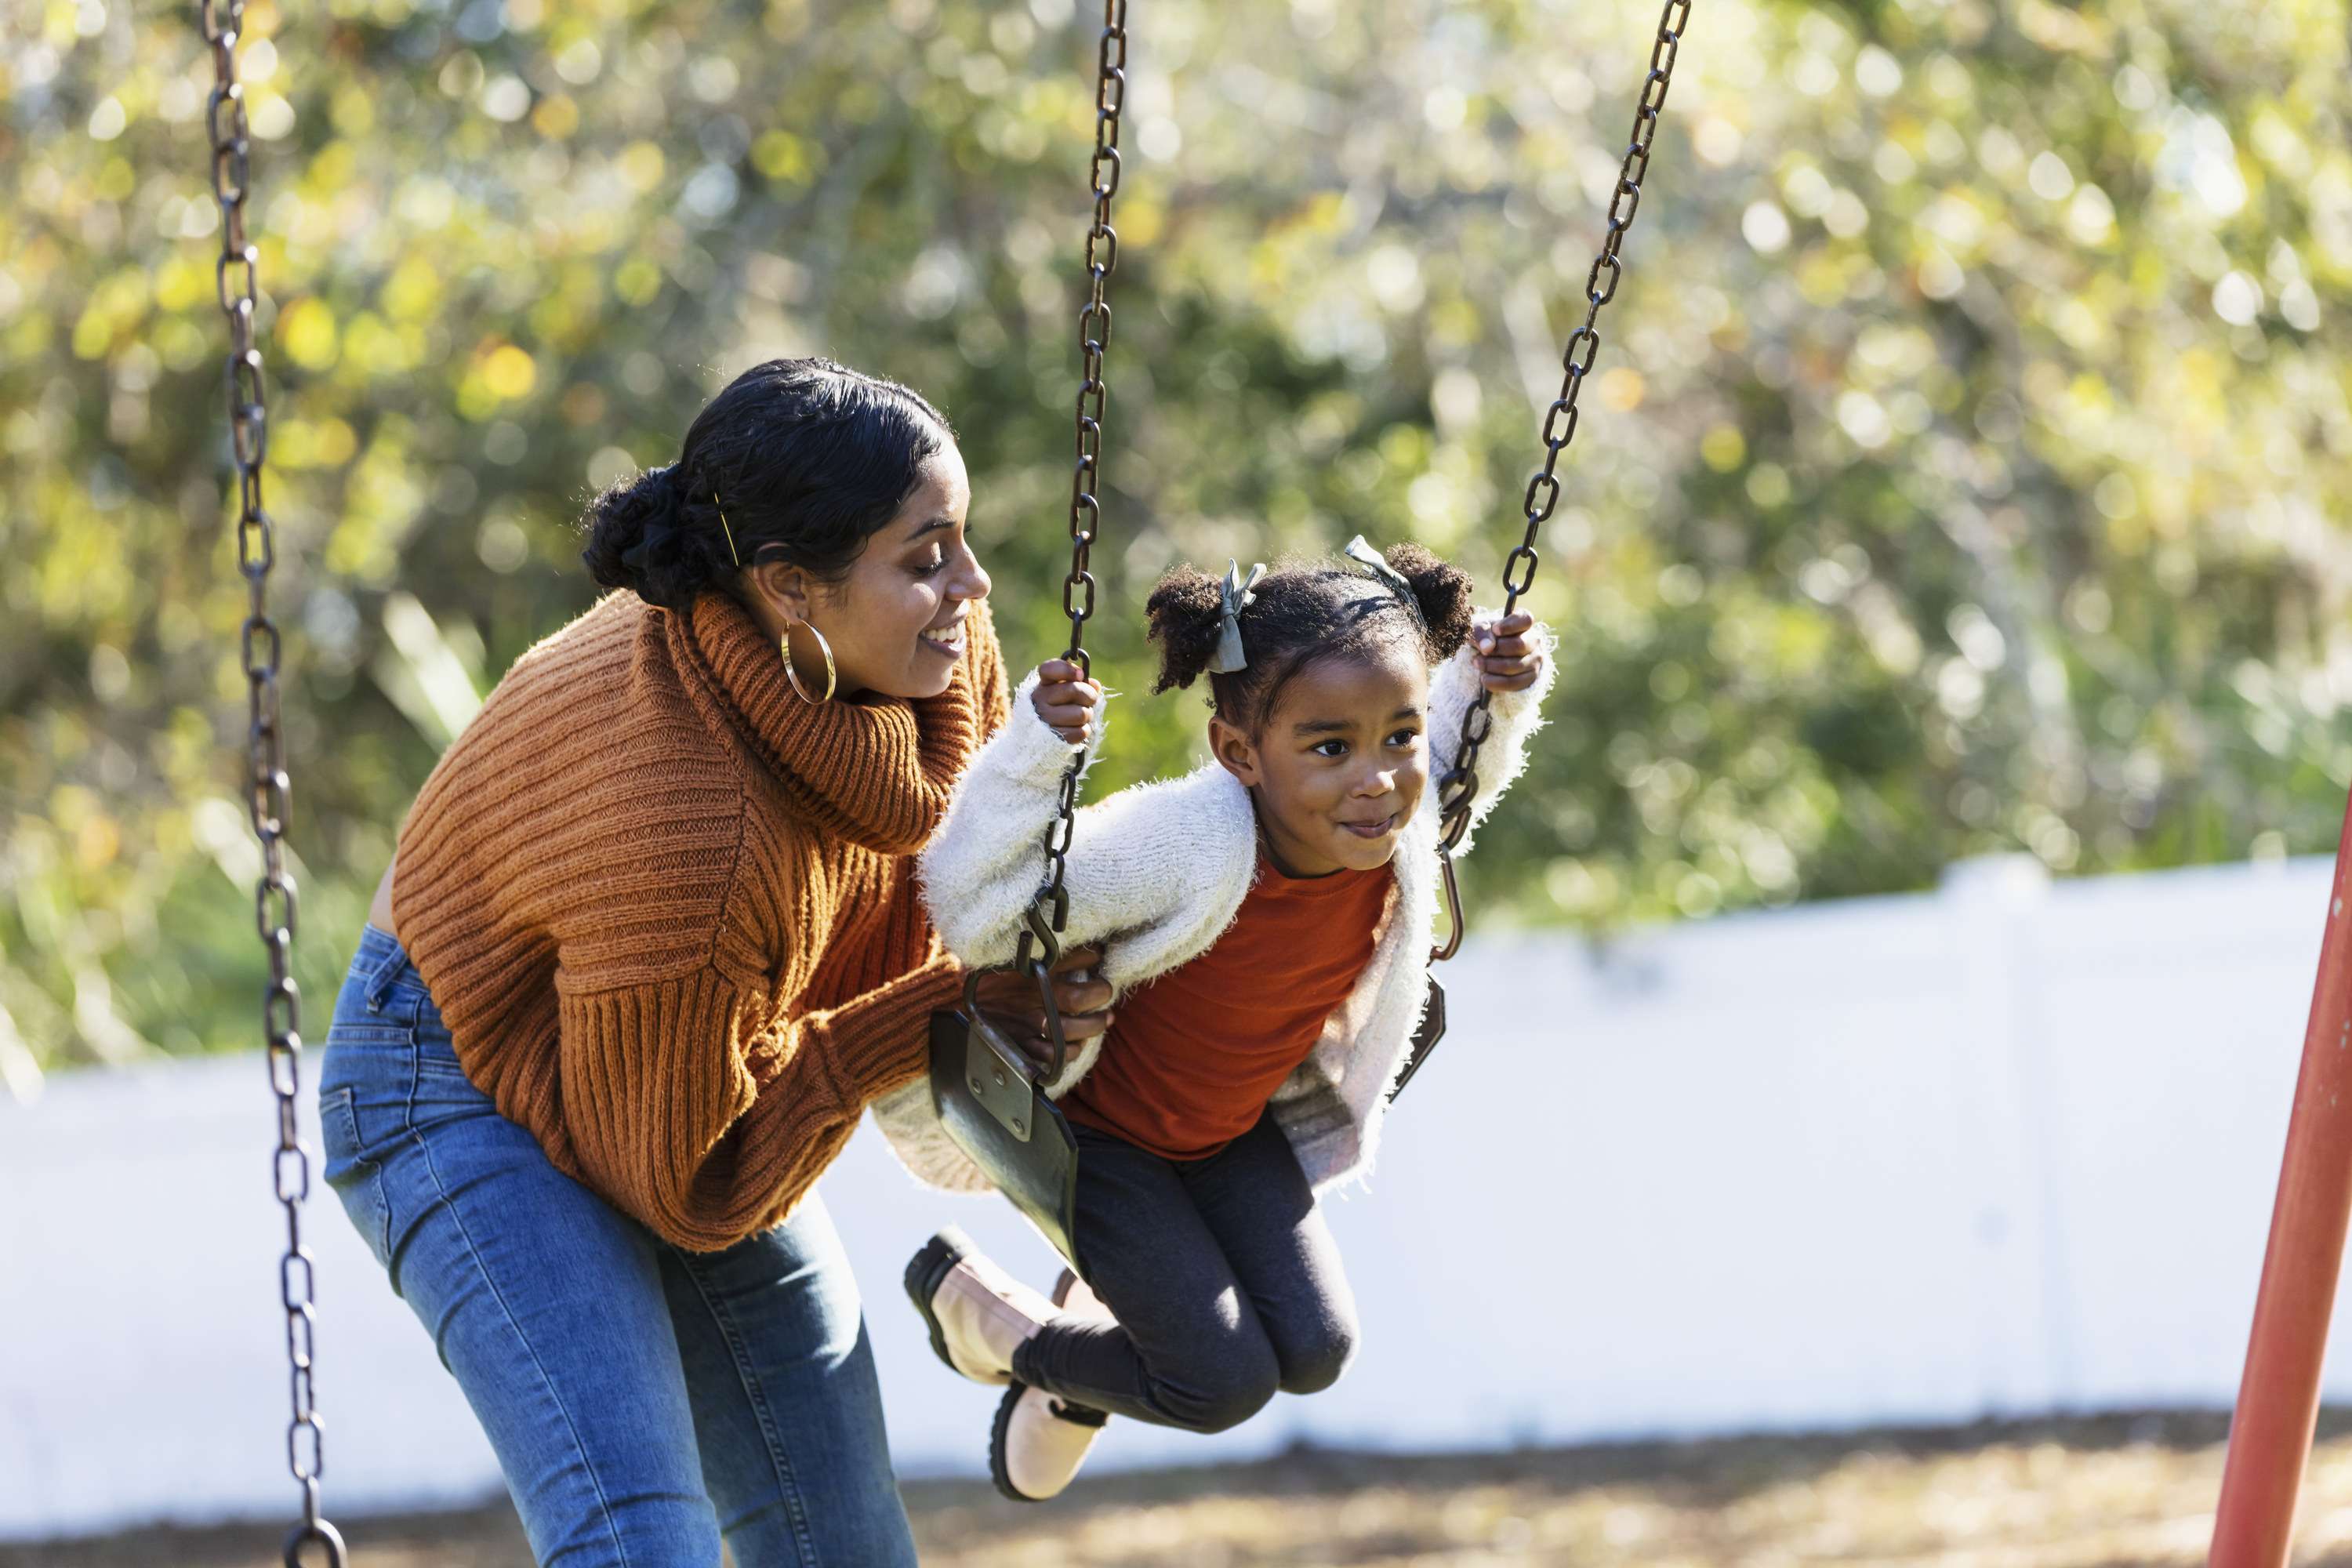 Woman pushing her daughter on the swings